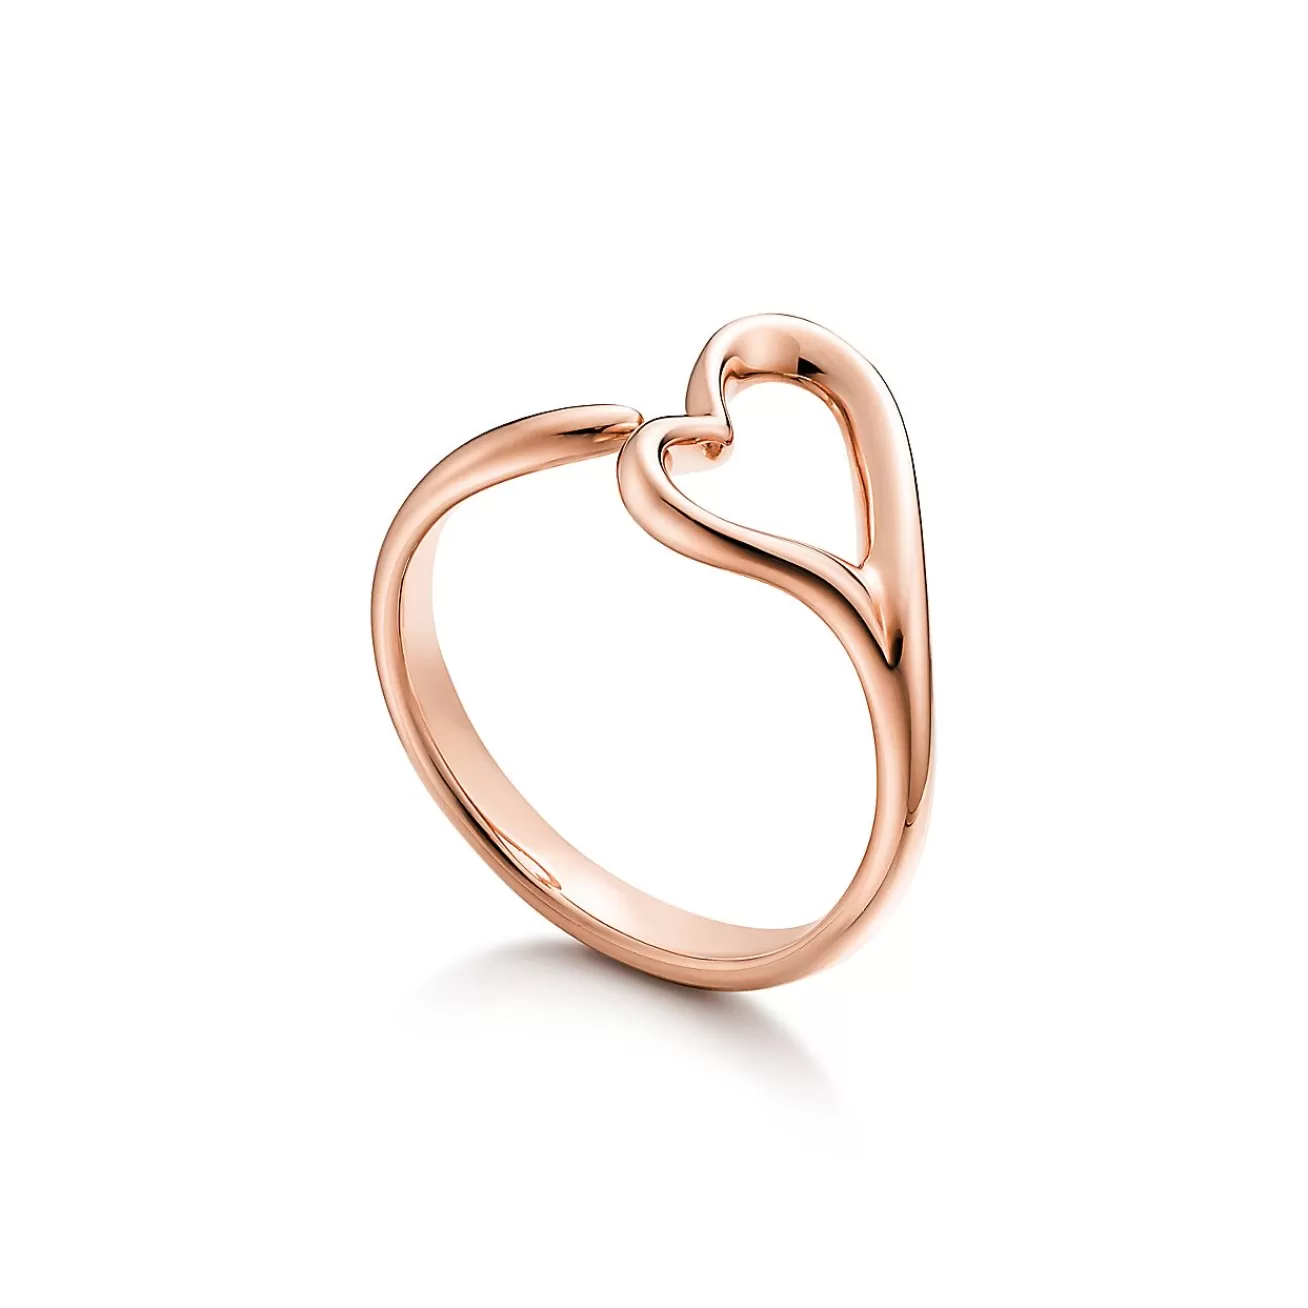 Tiffany & Co. Elsa Peretti® Open Heart ring in 18k rose gold, small. | ^ Rings | Rose Gold Jewelry